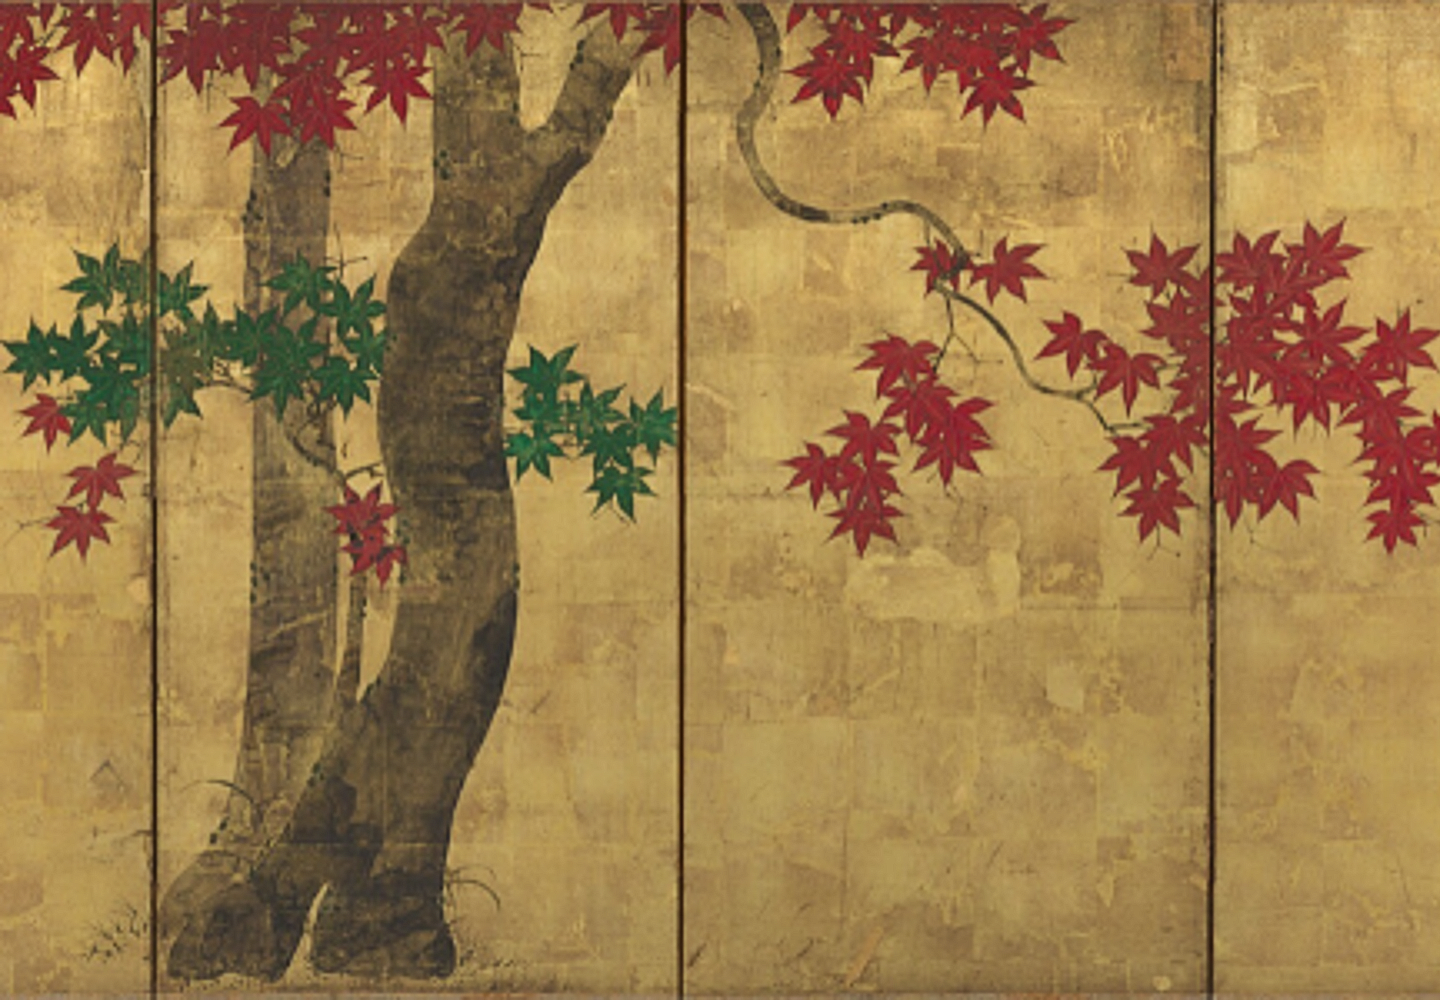 Painting Edo: Early Modern Masterworks from the Feinberg Collection